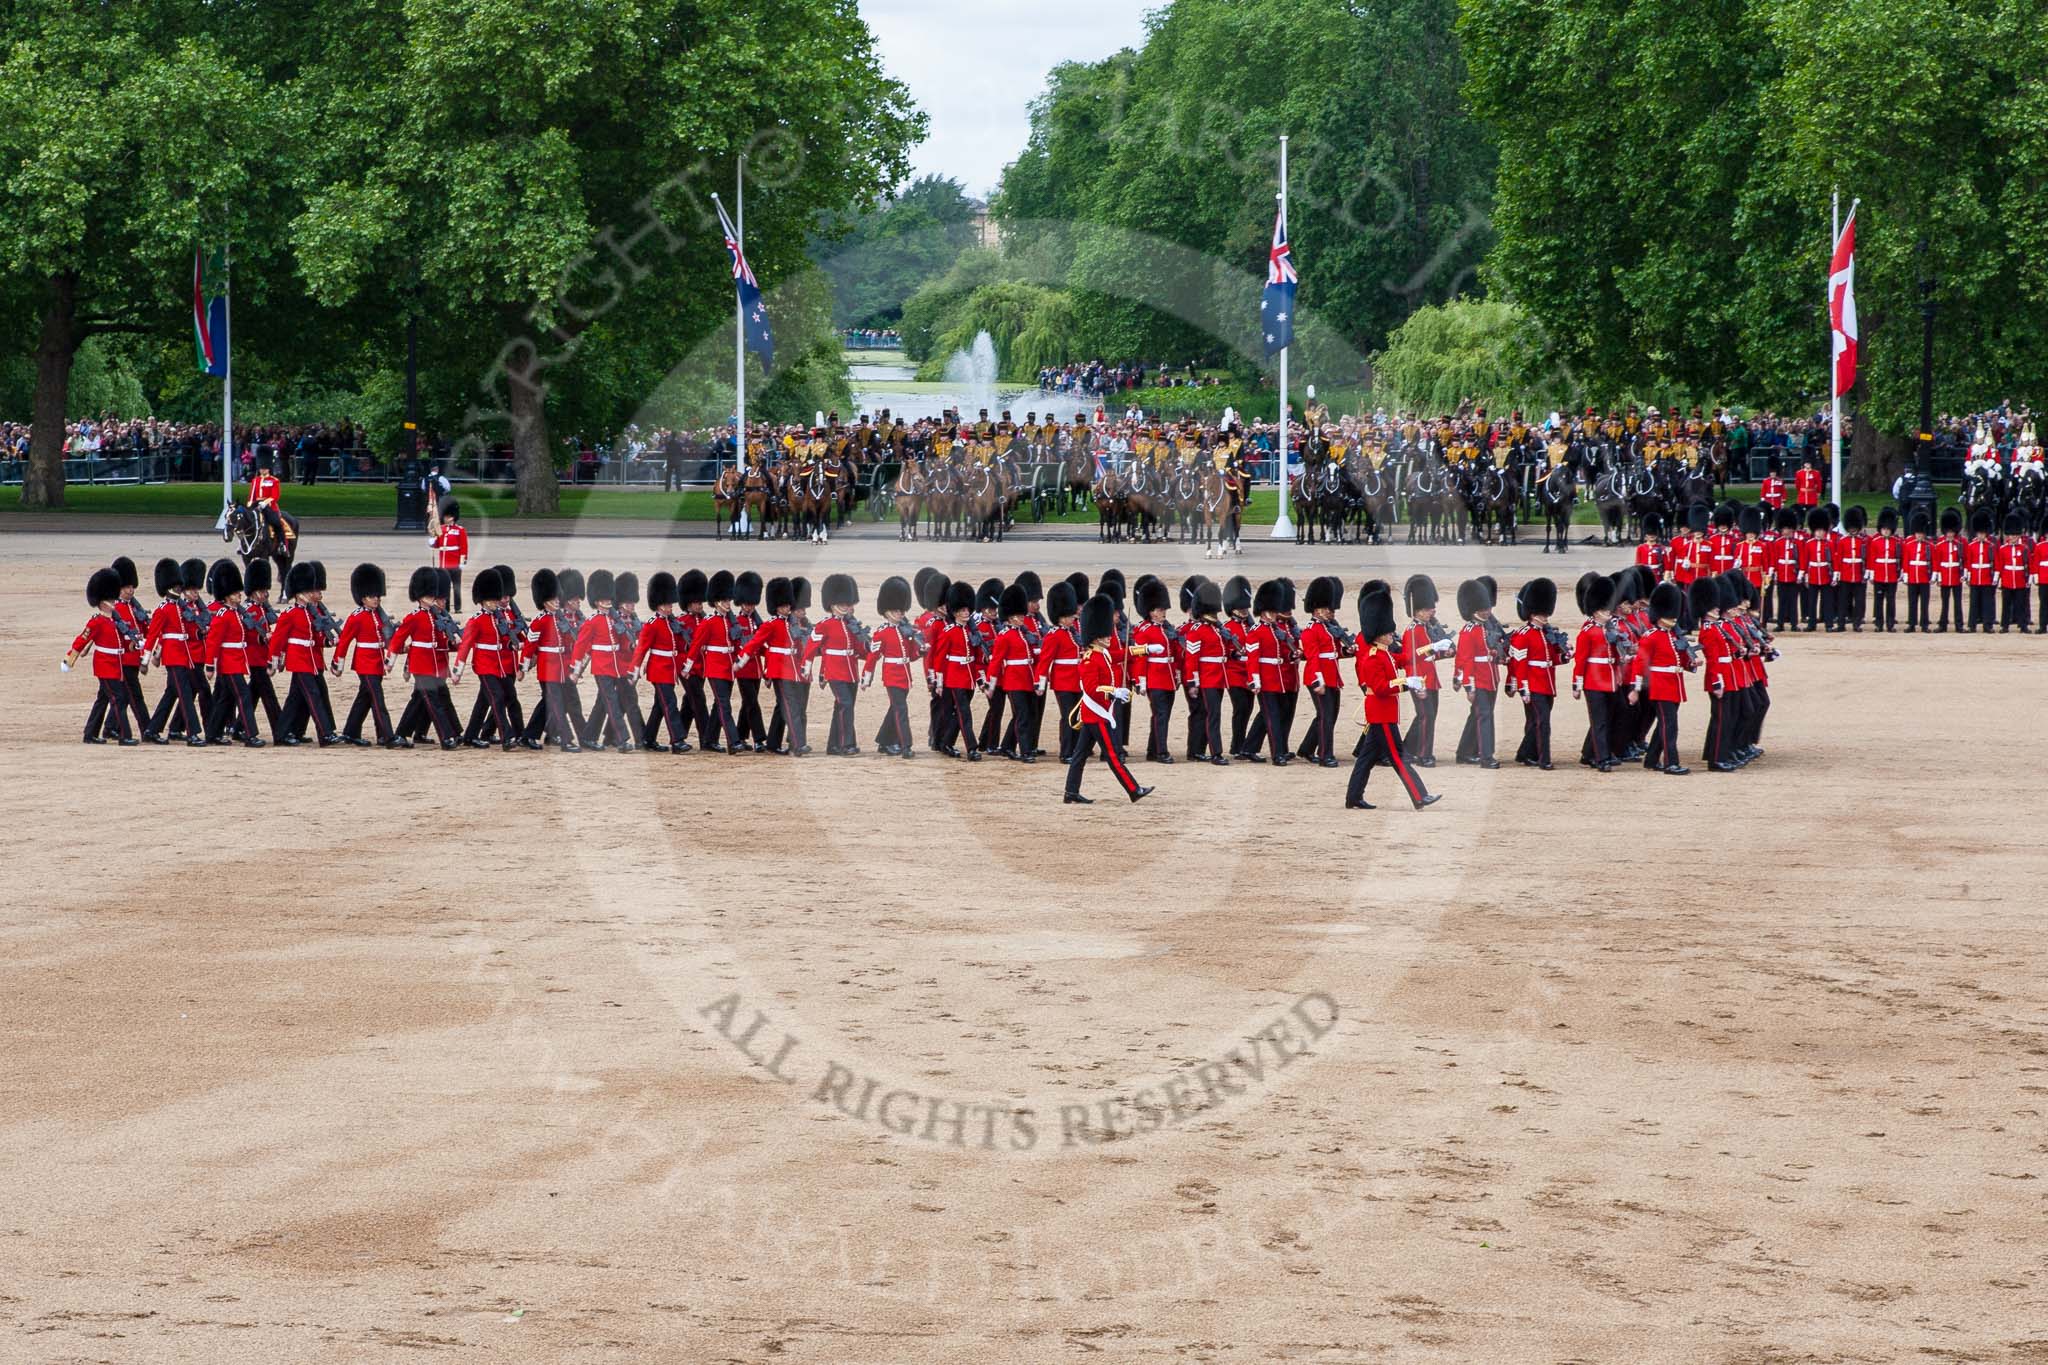 Trooping the Colour 2013: The men of No. 1 Guard (Escort for the Colour),1st Battalion Welsh Guards are moving into a new formation, facing the Coloir Party on the other side of Horse Guards Parade. Image #439, 15 June 2013 11:18 Horse Guards Parade, London, UK